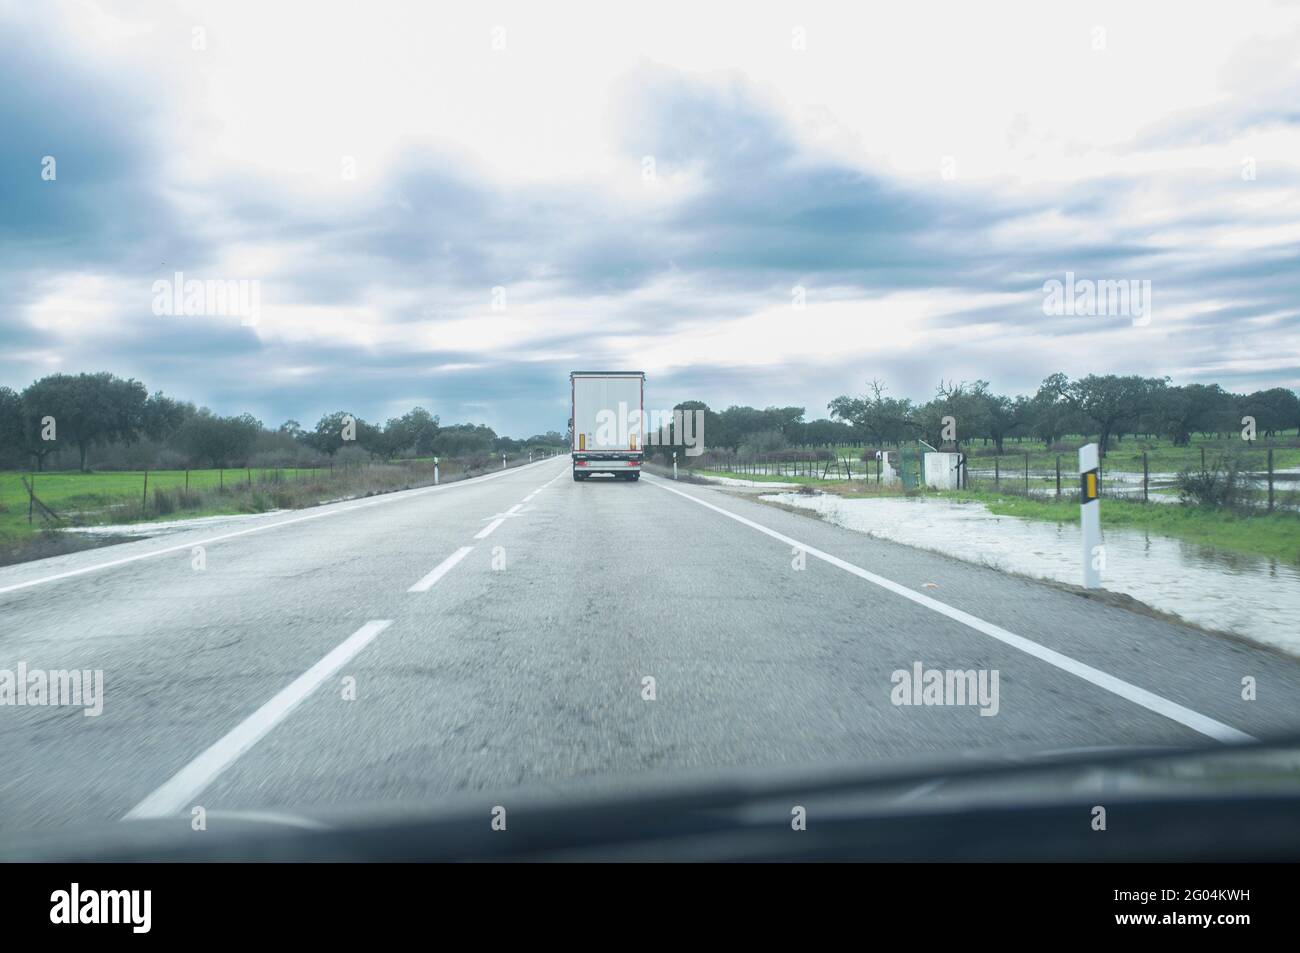 Driving behind a truck under persistent drizzle. Bad-weather driving concept Stock Photo